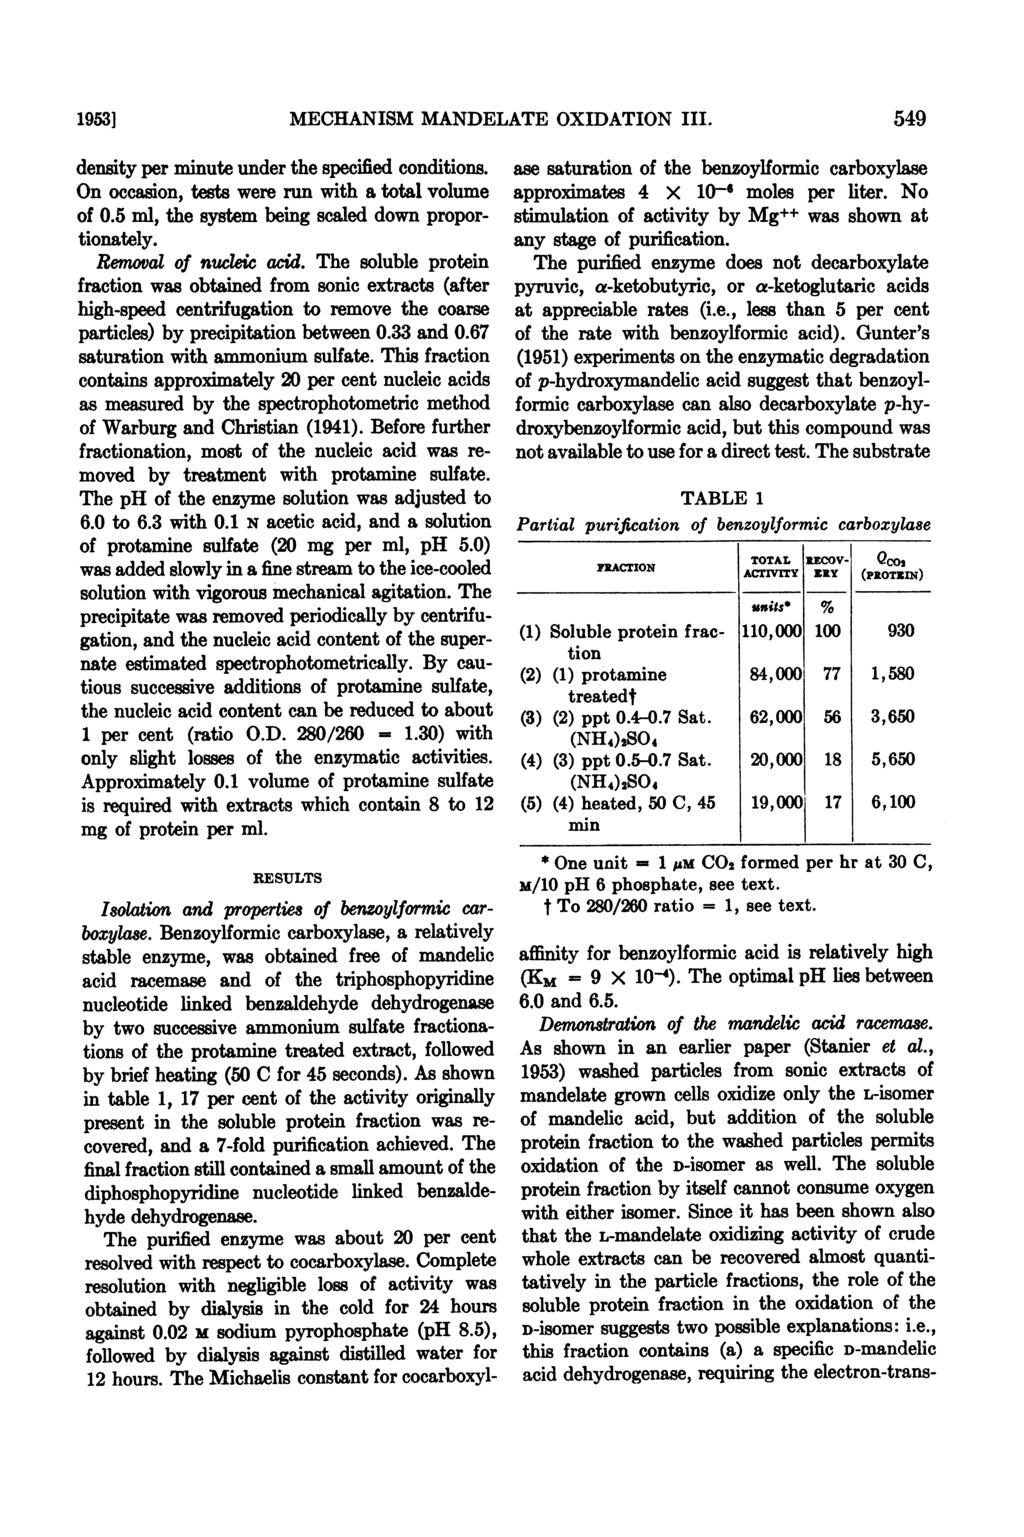 1953] MECHANISM MANDELATE OXIDATION III. density per minute under the specified conditions. On occasion, tests were run with a total volume of 0.5 ml, the system being scaled down proportionately.